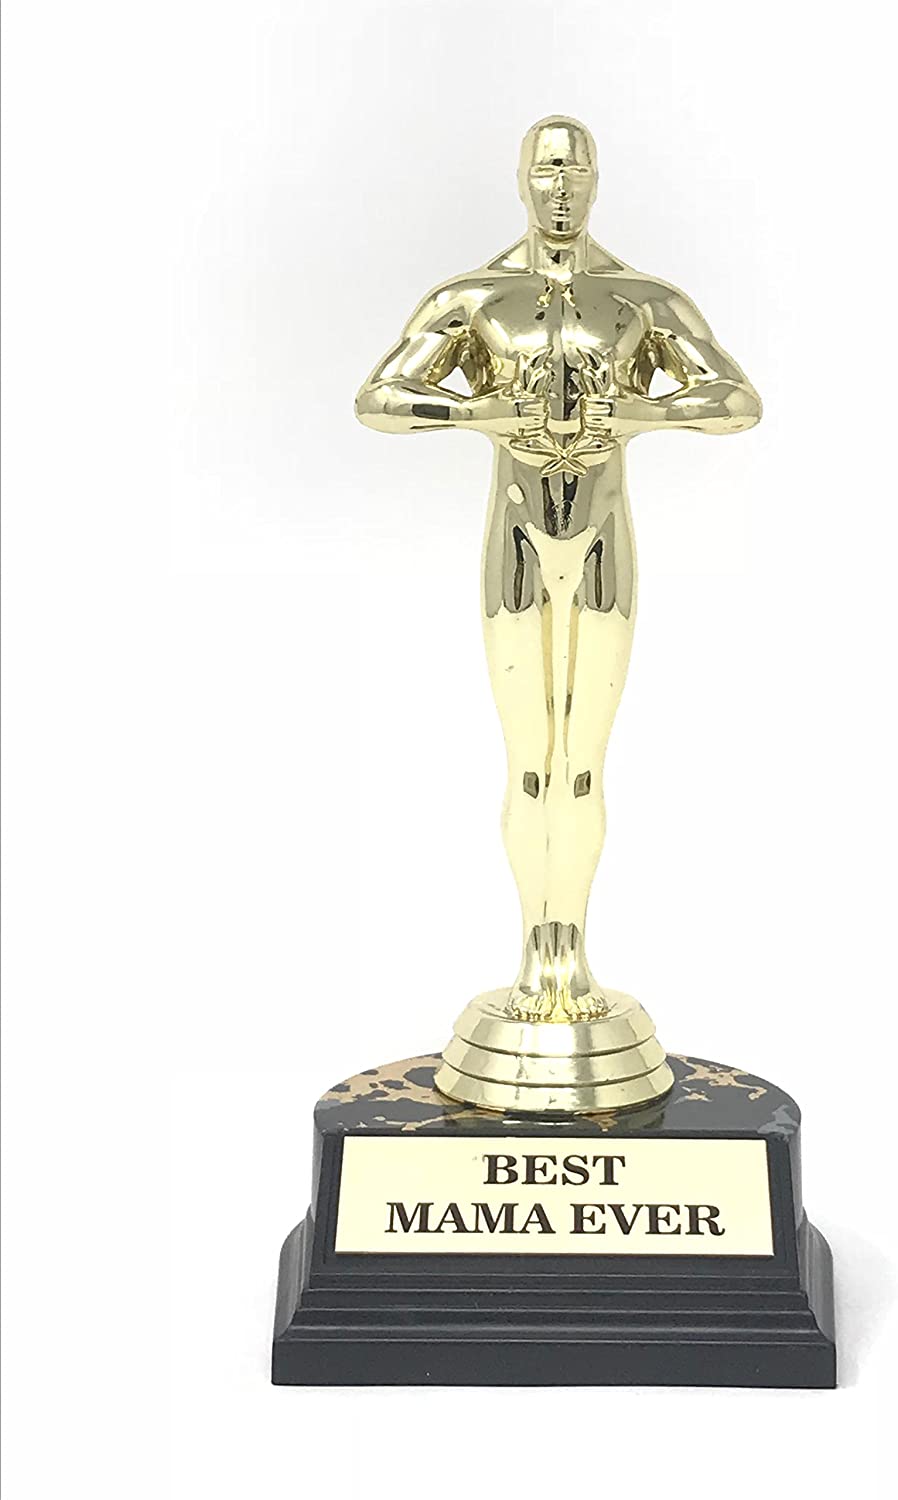 Best Mama Ever Trophy (7 inches)